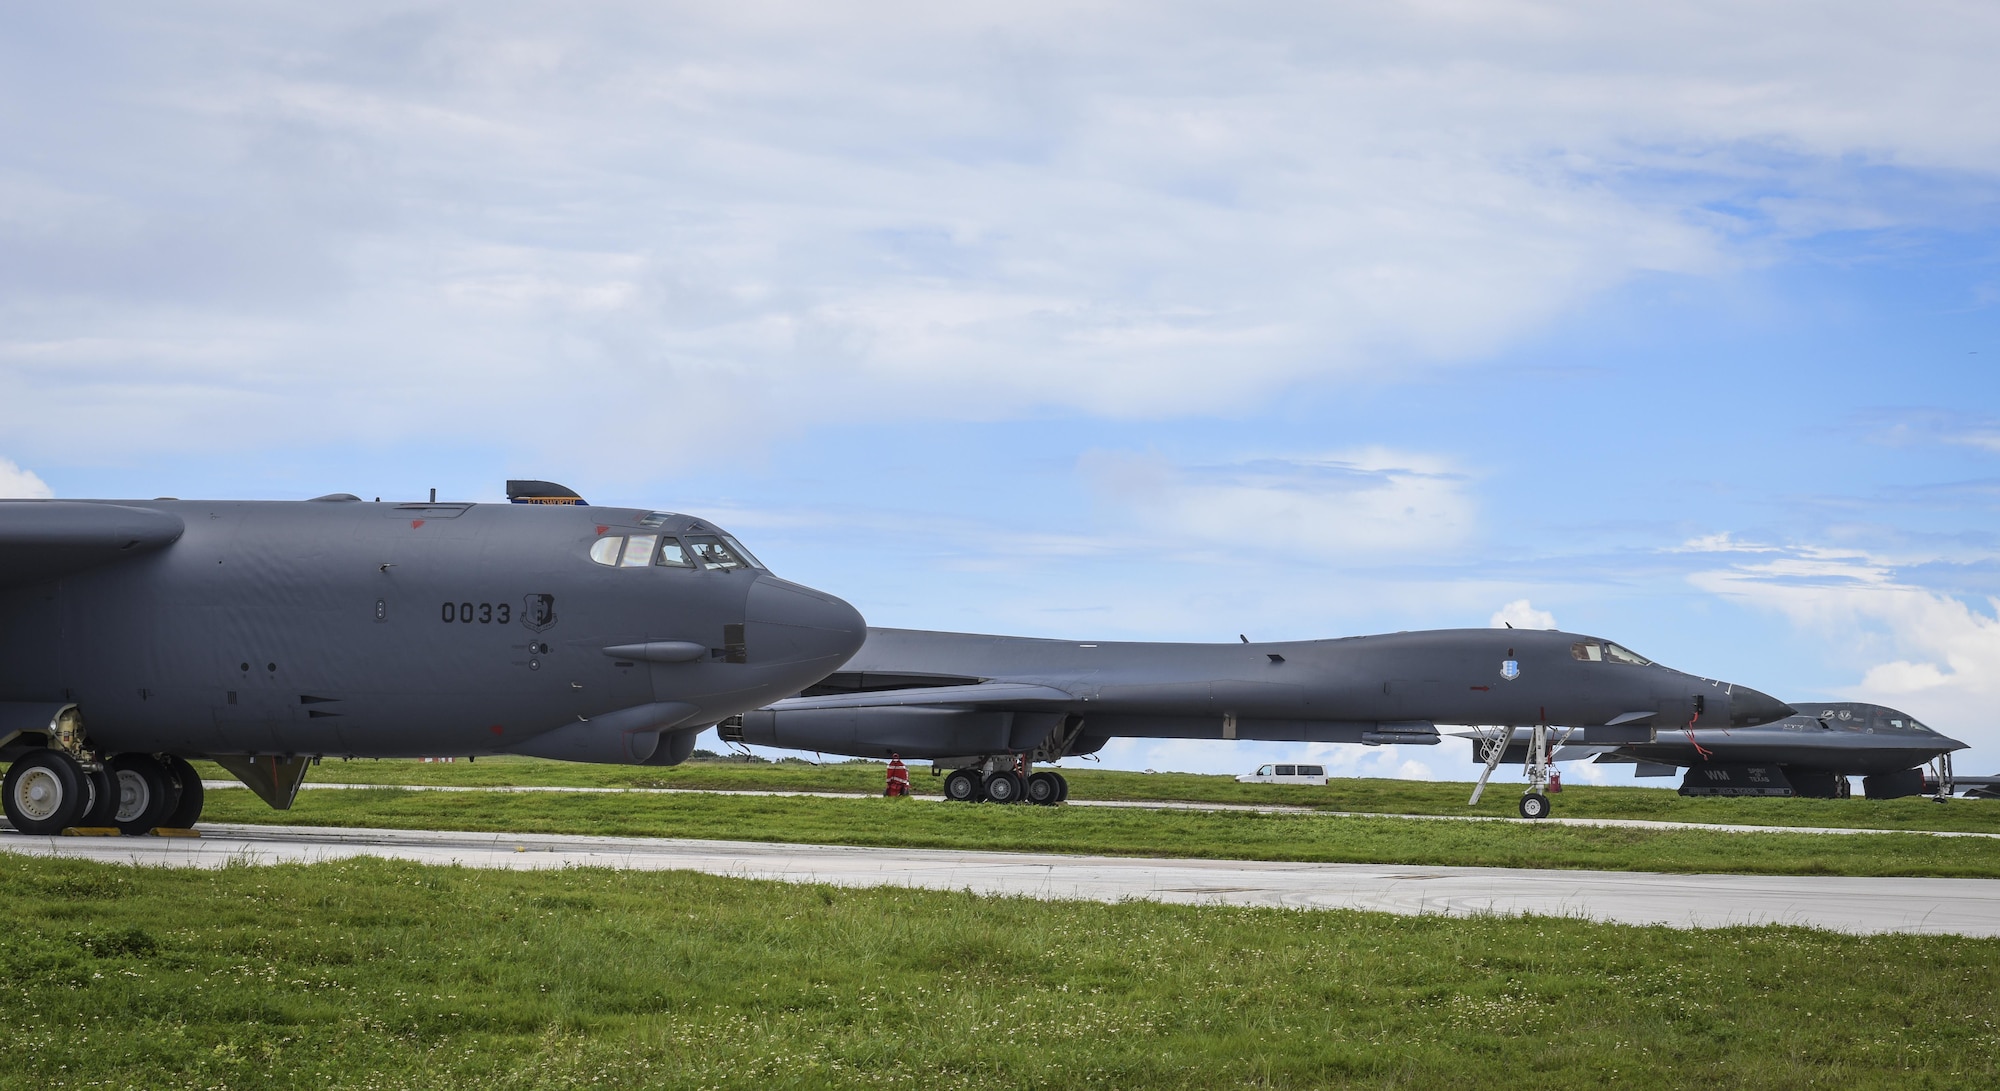 A B-52 Stratofortress, B-1 Lancer and B-2 Spirit sit beside one another on the flightline at Andersen Air Force Base, Guam, Aug.10, 2016. This marks the first time in history that all three of Air Force Global Strike Command's strategic bomber aircraft are simultaneously conducting operations in the U.S. Pacific Command area of operations. The B-1 Lancer, which arrived at Andersen Aug. 6, will replace the B-52 in support of the U.S. Pacific Command Continuous Bomber Presence mission. The CBP bomber swap between the B-1 and B-52 is occurring throughout the month of August as the B-1s return to support this mission for the first time since April 2006. In addition to the CBP bomber swap, three B-2s arrived in theater to conduct a Bomber Assurance and Deterrence deployment. The CBP mission and BAAD deployments are part of a long-standing history of maintaining a consistent bomber presence in the Indo-Asia-Pacific in order to maintain regional stability, and provide assurance to our allies and partners in the region. (U.S. Air Force photo by Tech. Sgt. Richard Ebensberger)